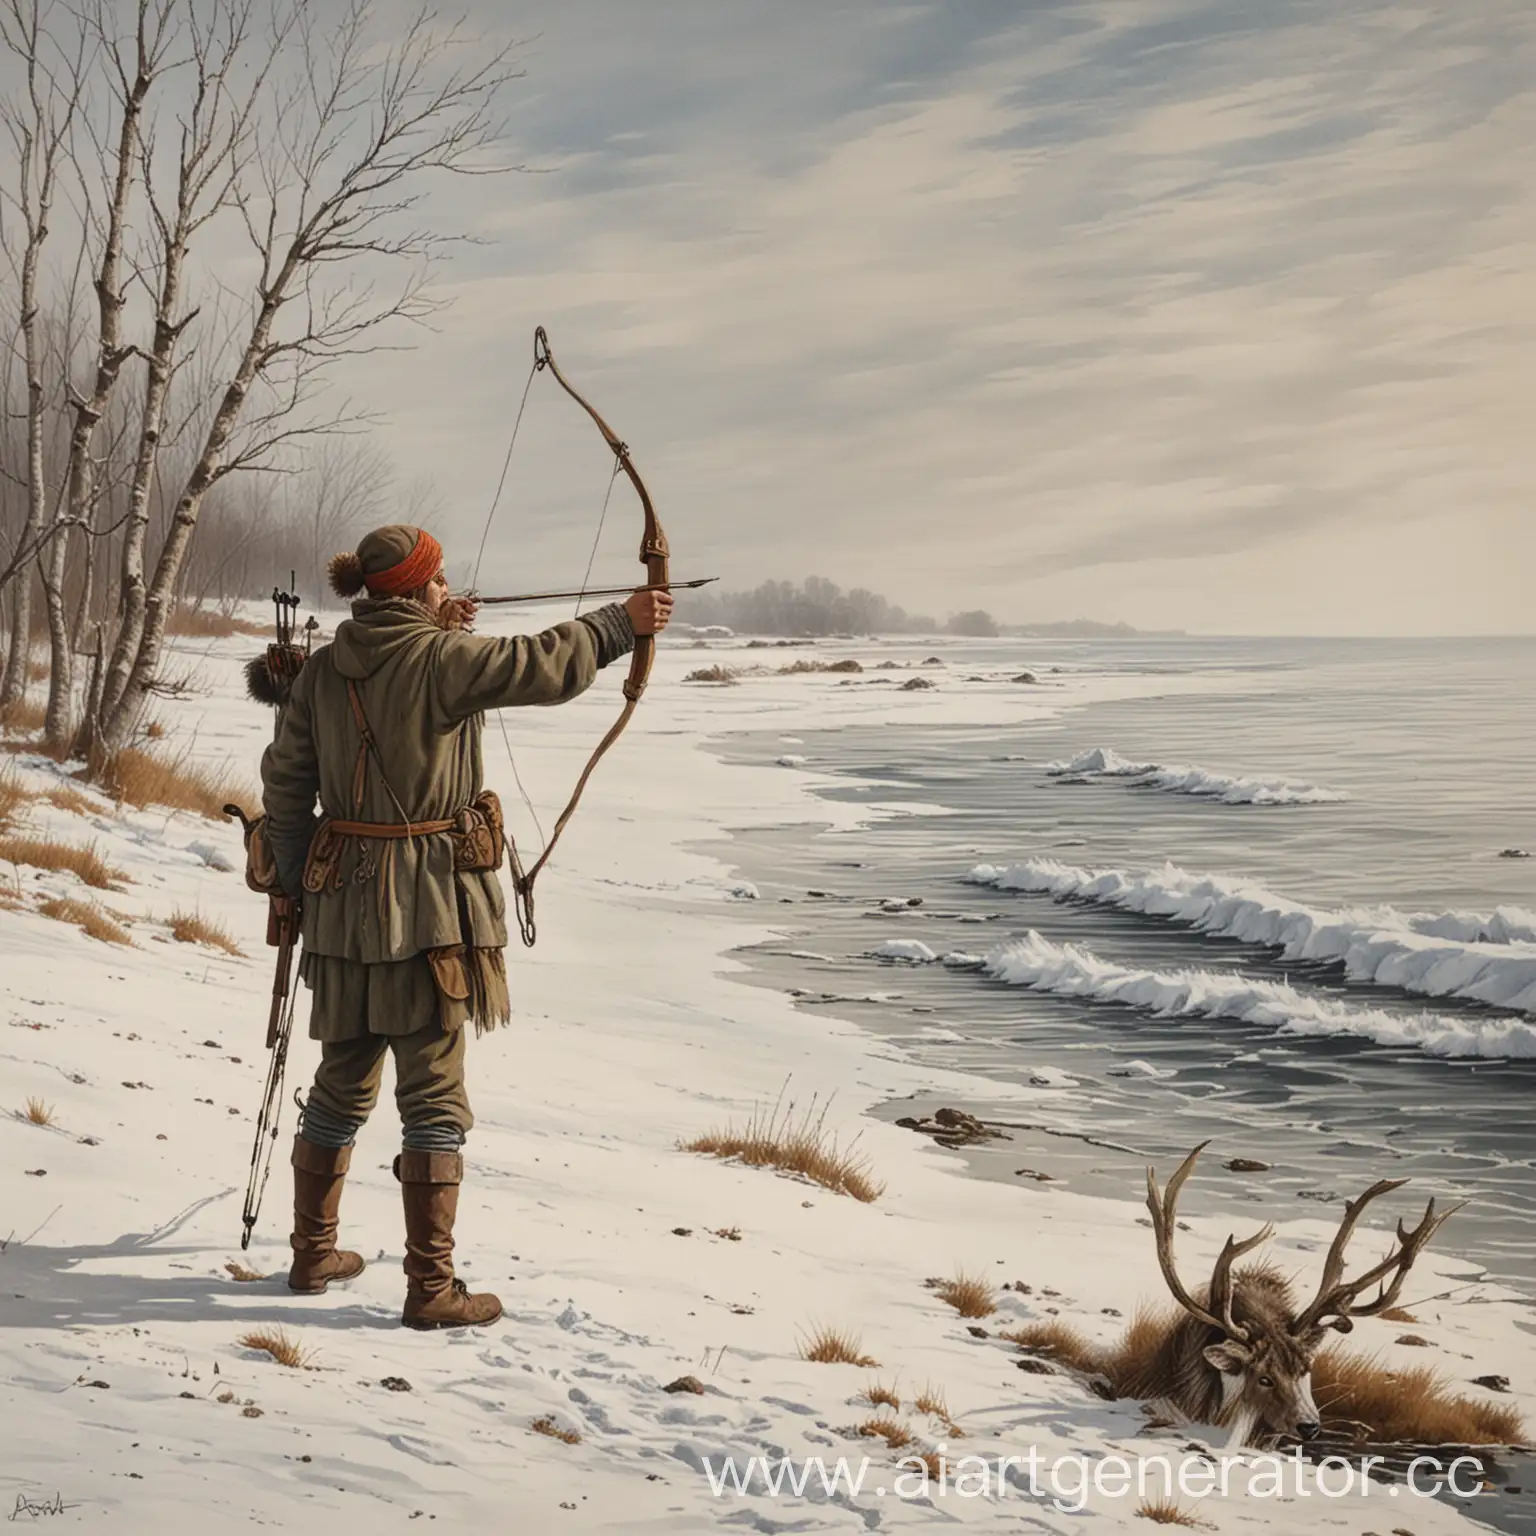 Winter-Shore-Bow-Hunting-Lone-Hunter-Amidst-Snowy-Landscape